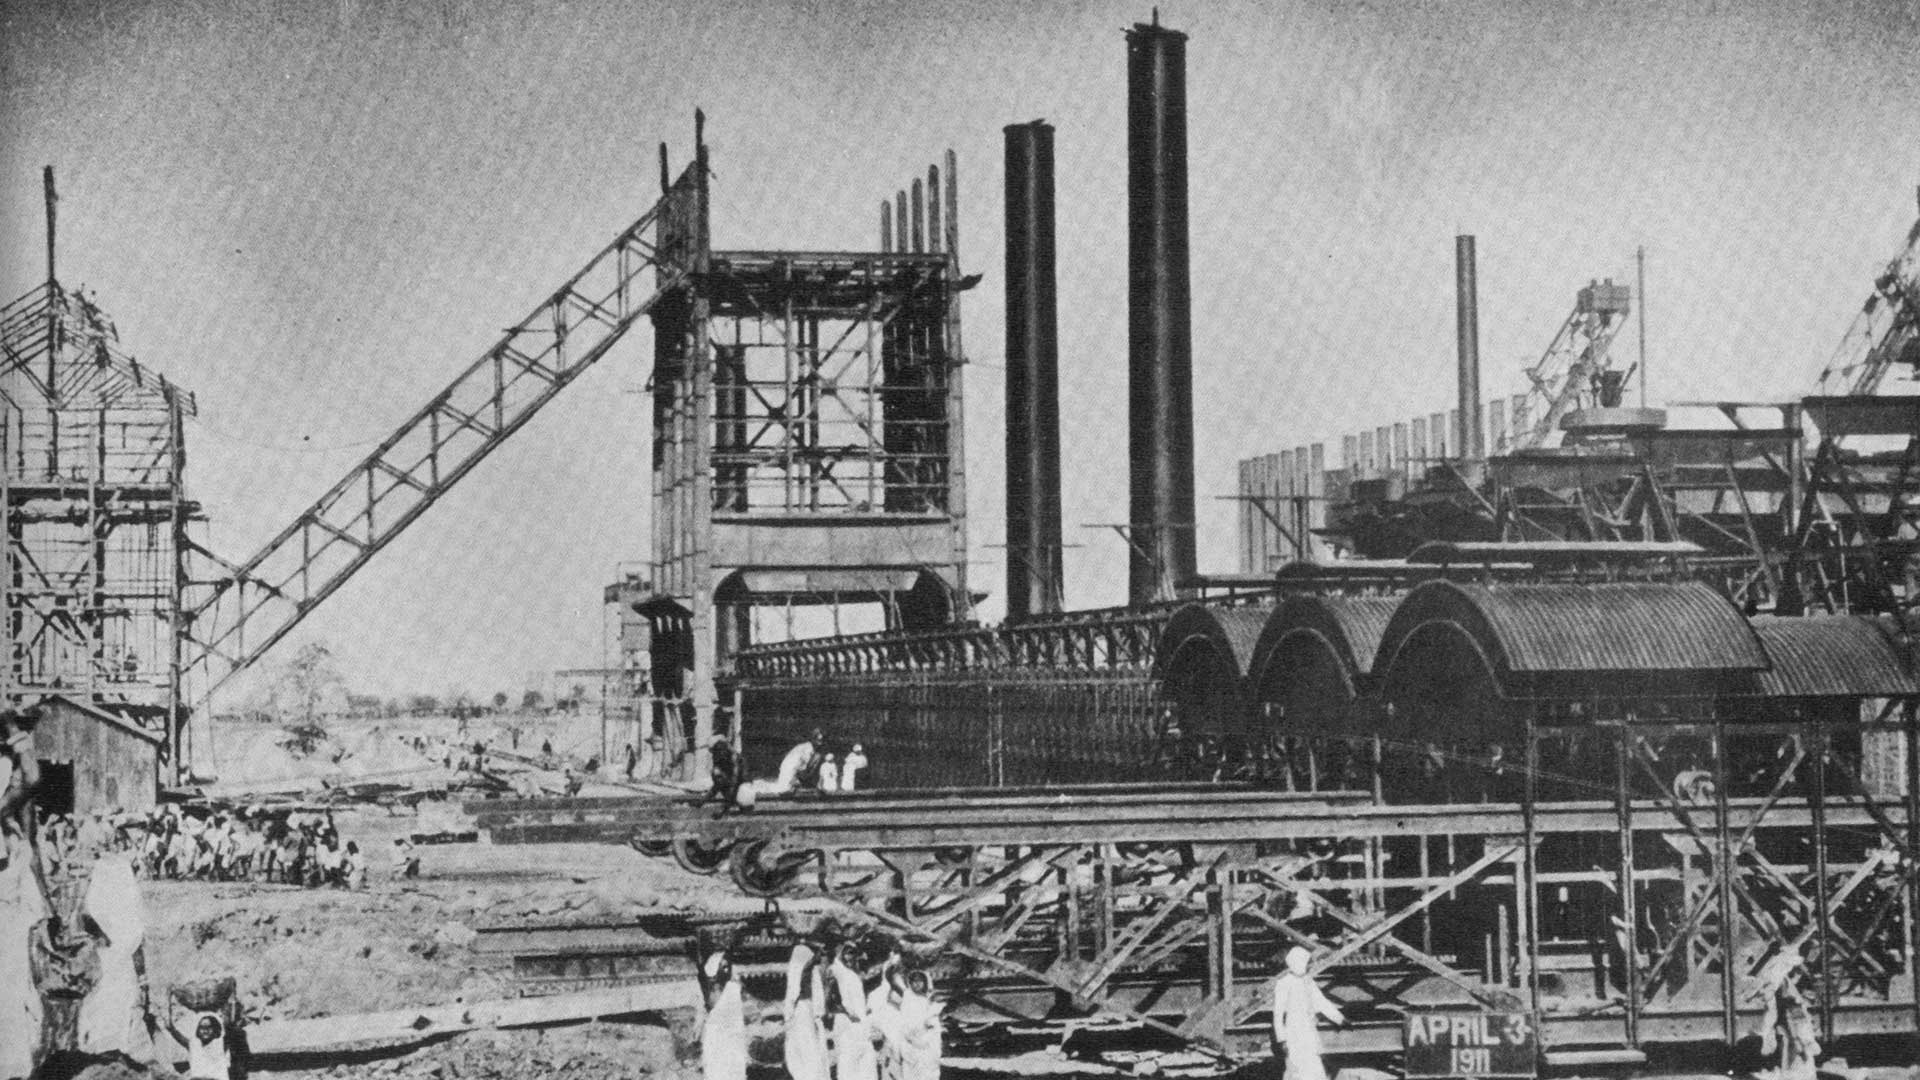 Tata Iron and Steel Company (TISCO) was set up in 1907